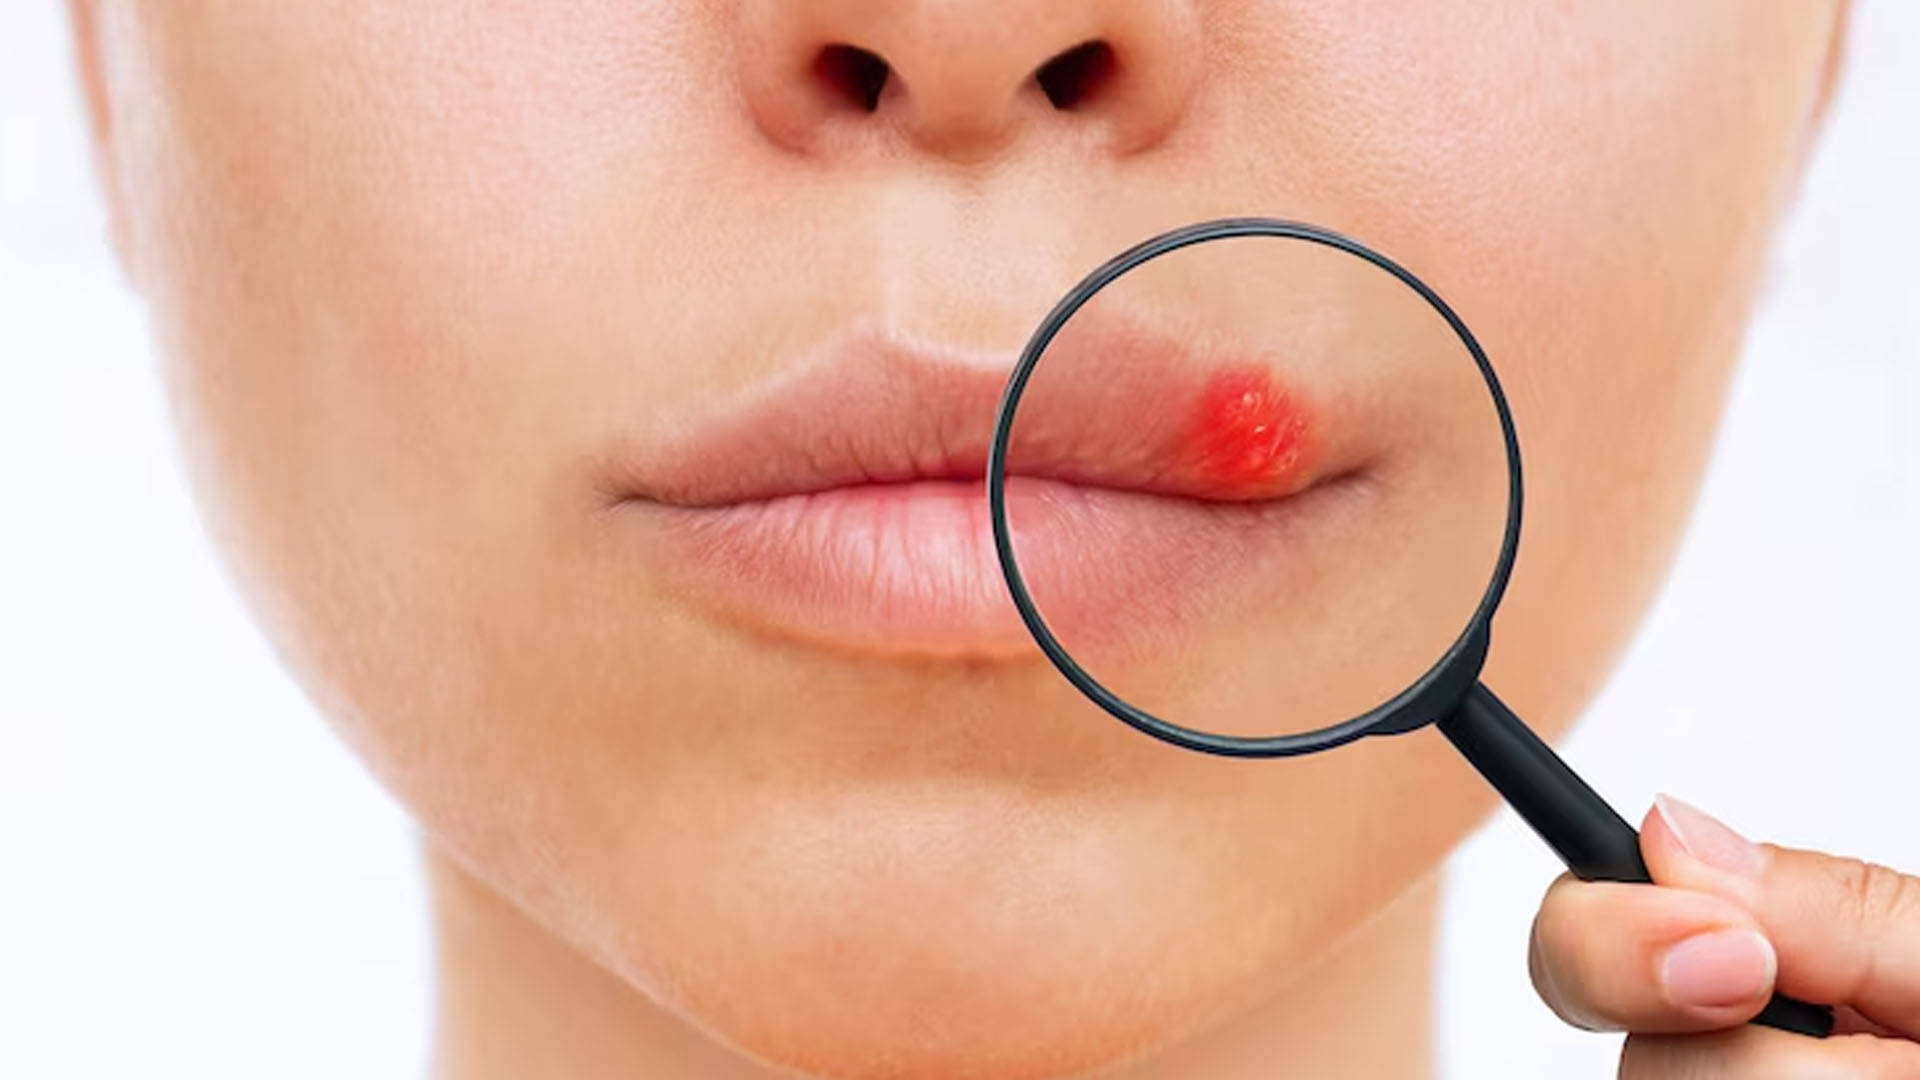 What are the Home Remedies for Lip Allergy?